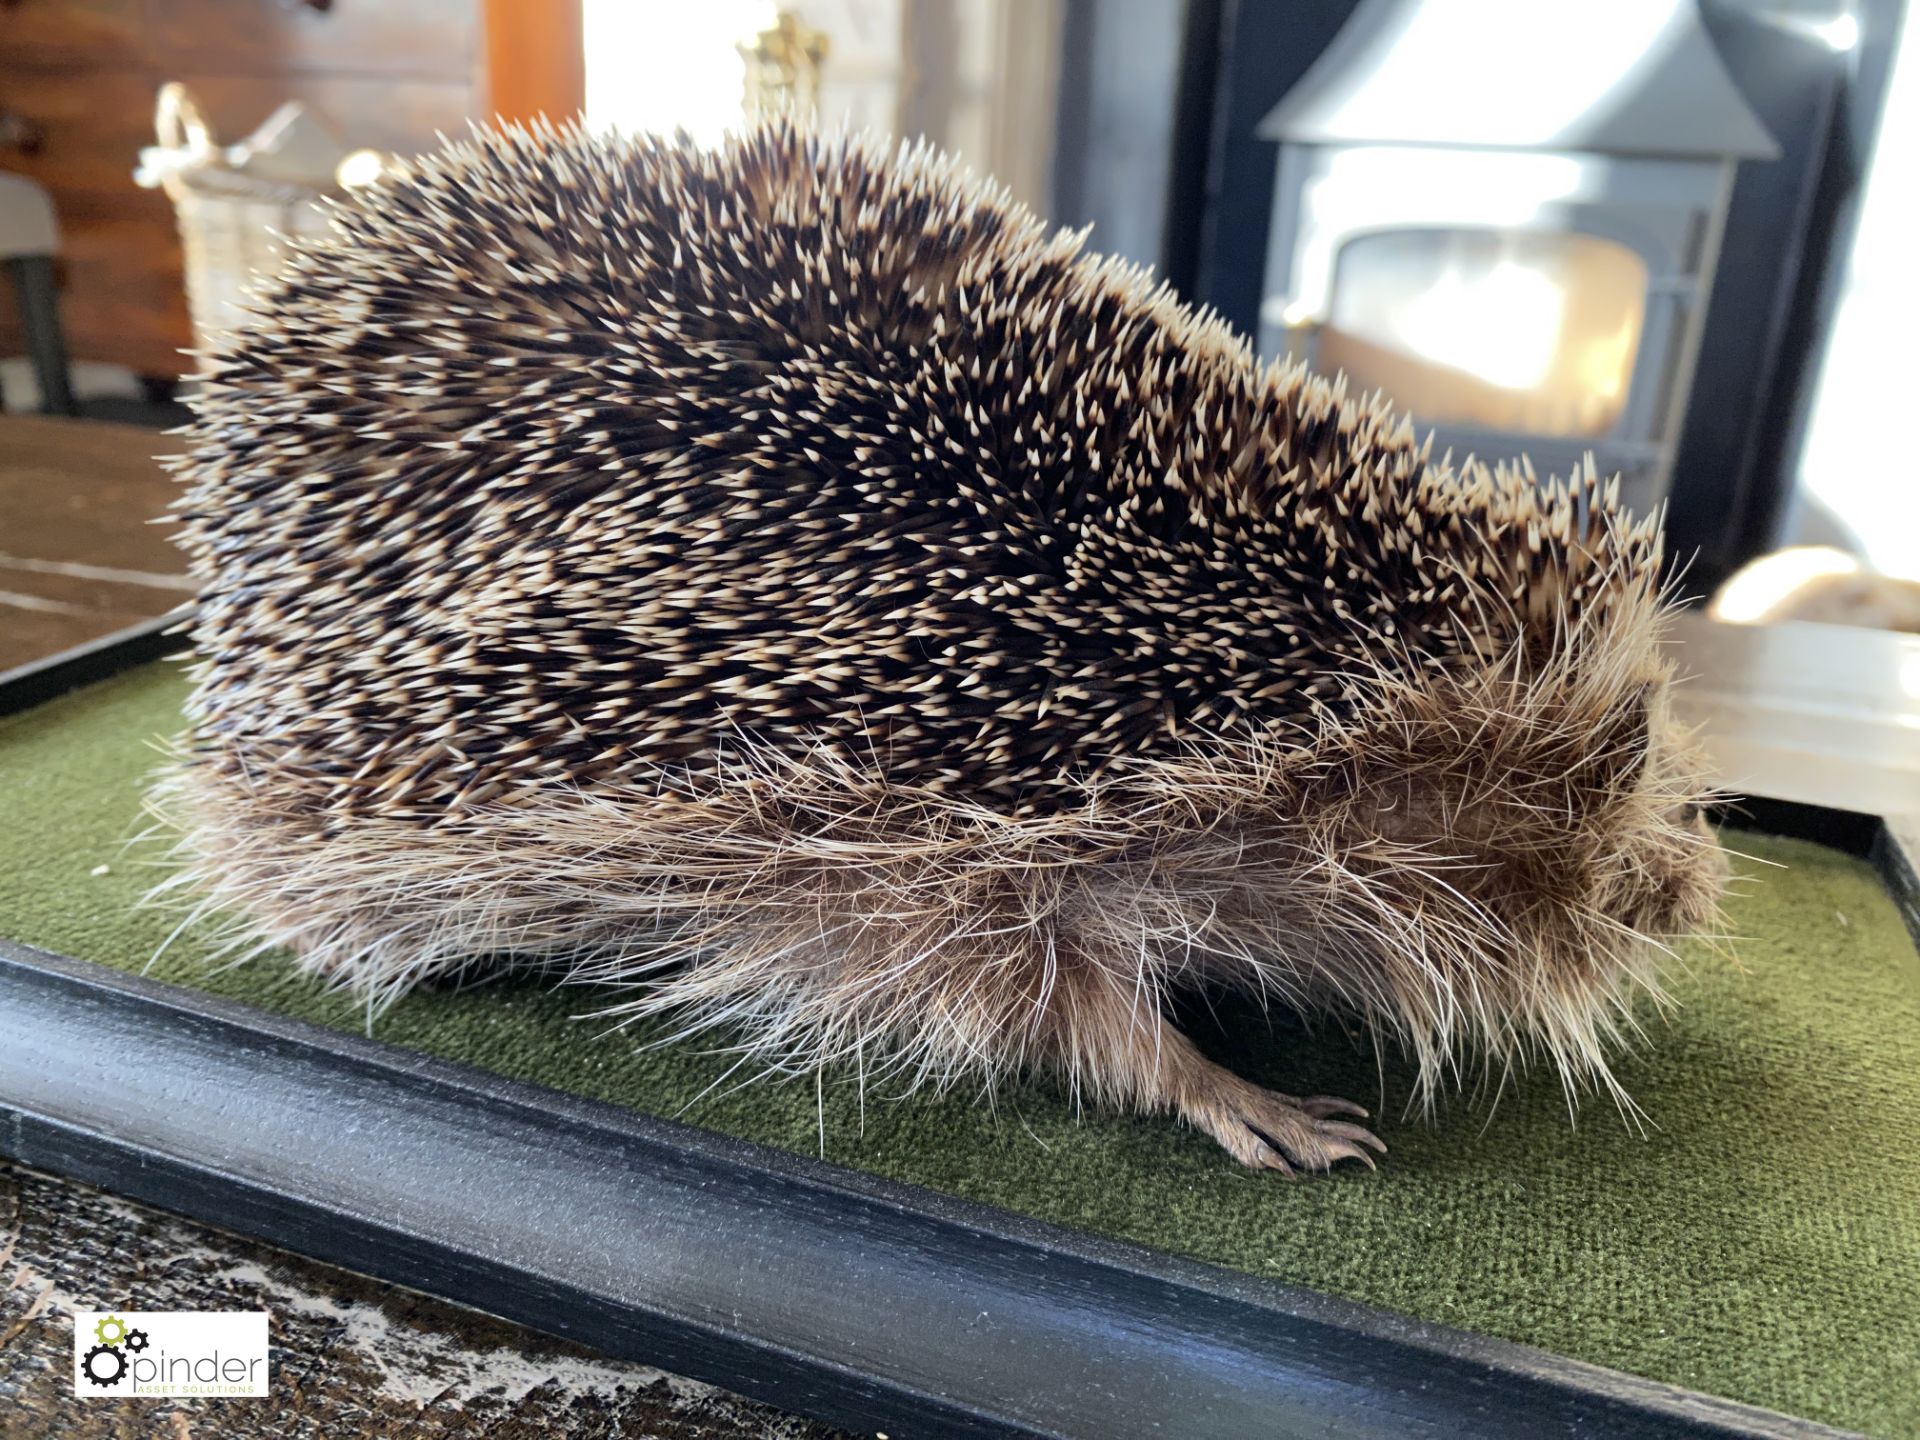 Taxidermy Hedgehog in glass case - Image 4 of 9